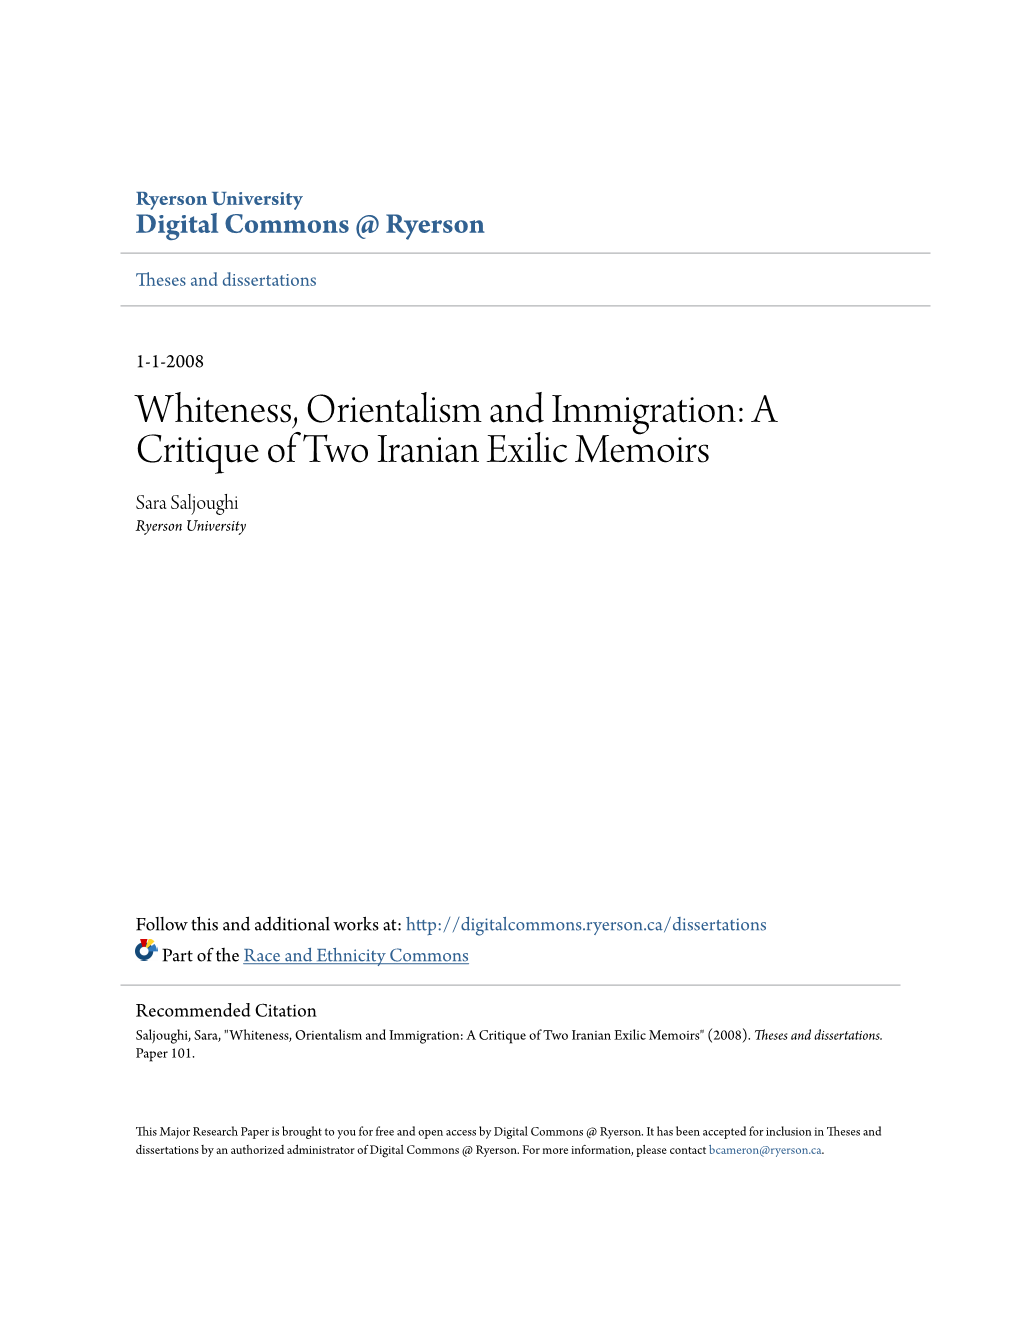 Whiteness, Orientalism and Immigration: a Critique of Two Iranian Exilic Memoirs Sara Saljoughi Ryerson University